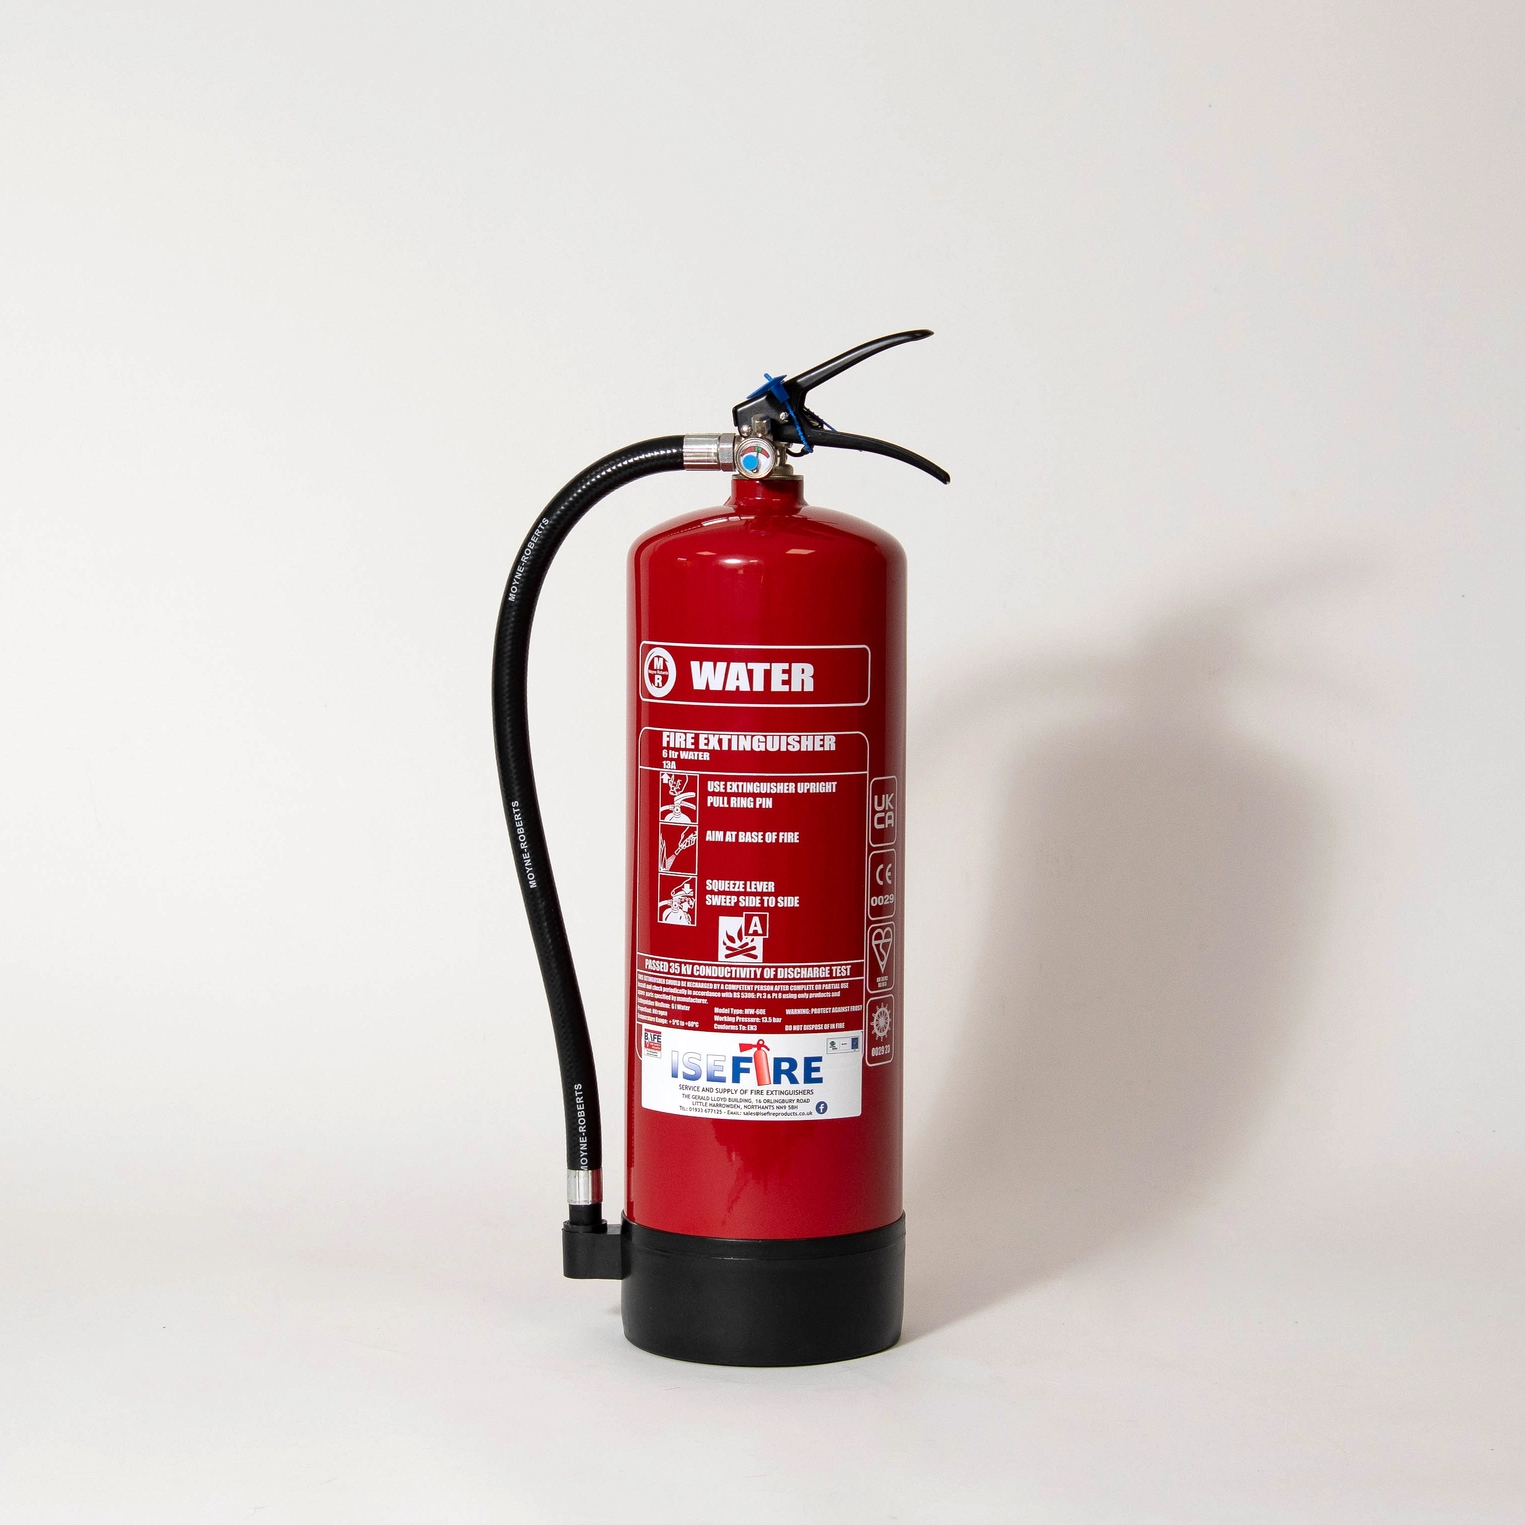 Red fire extinguisher.